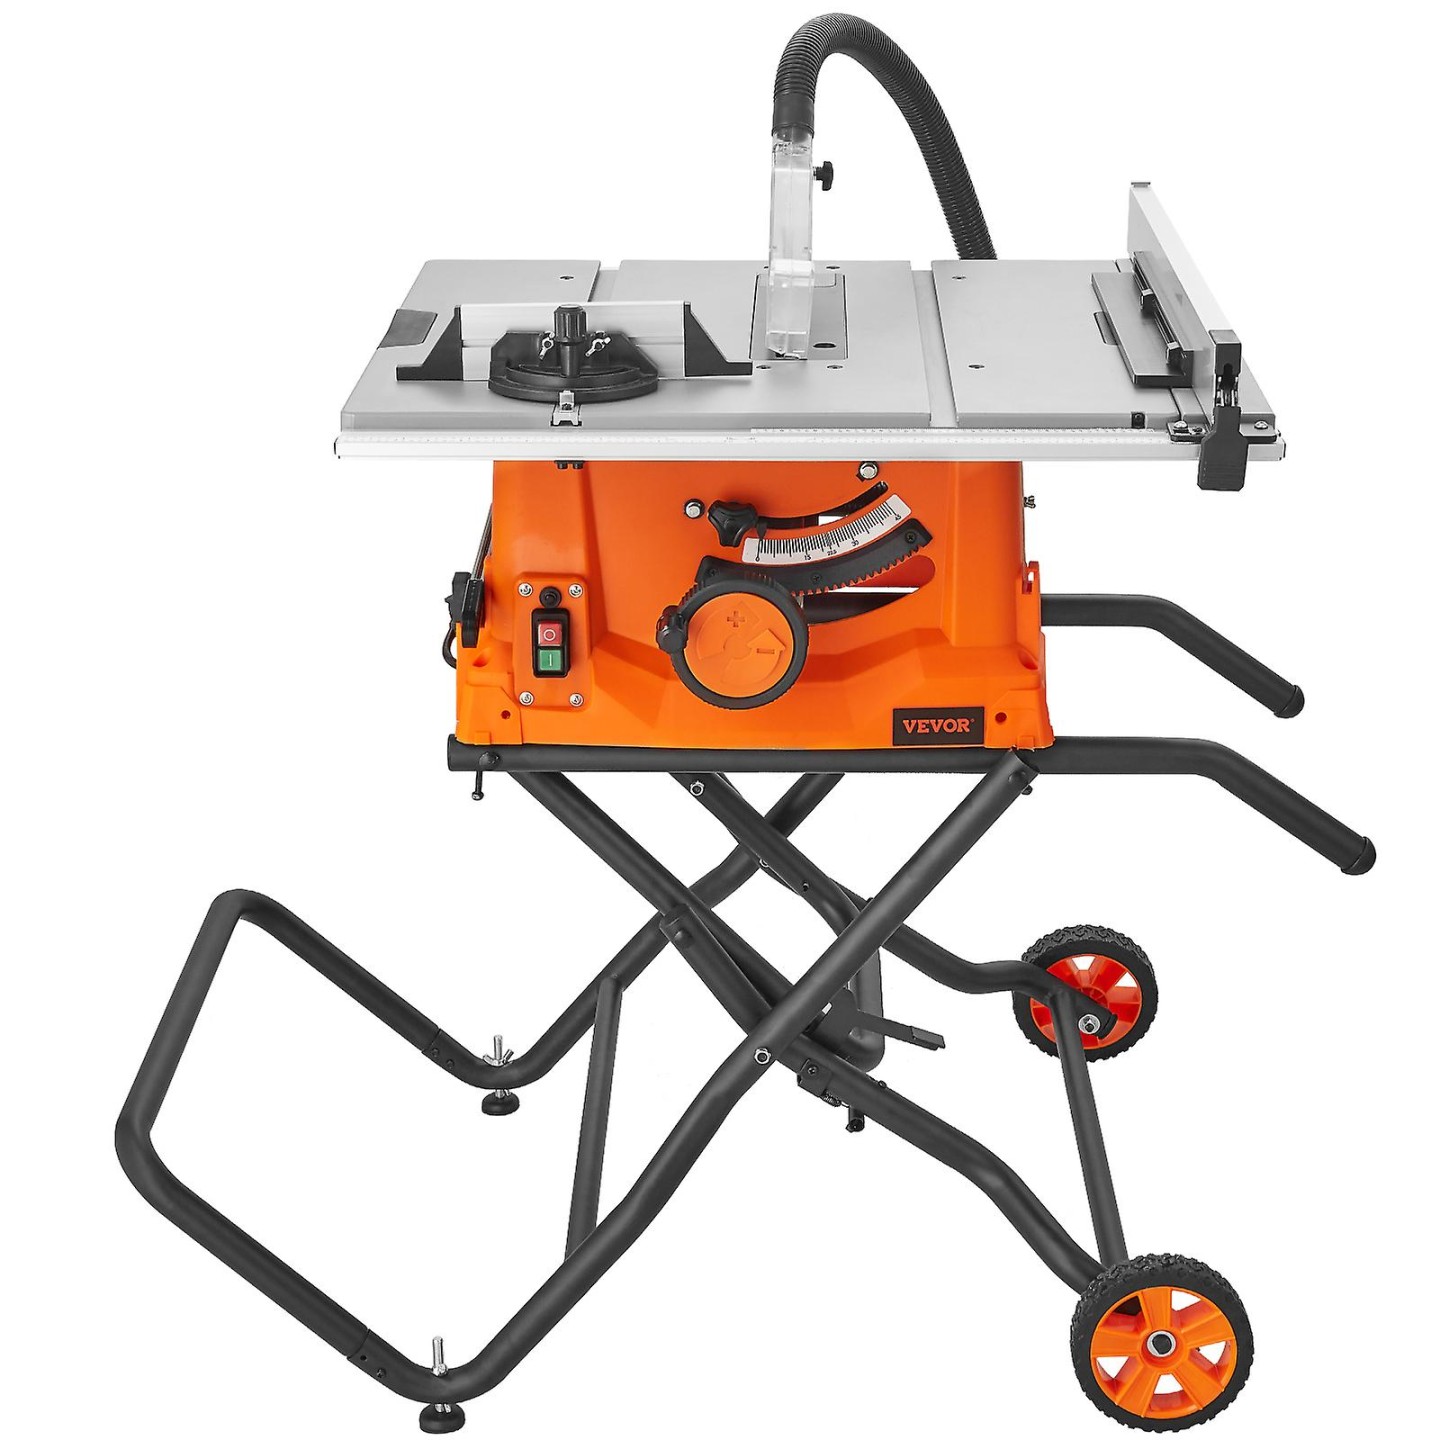 Table Saw With Stand, -inch -amp, -in Max Rip Capacity, Cutting Speed  Up To 0rpm, t Blade, For Woodworking & Furniture Making